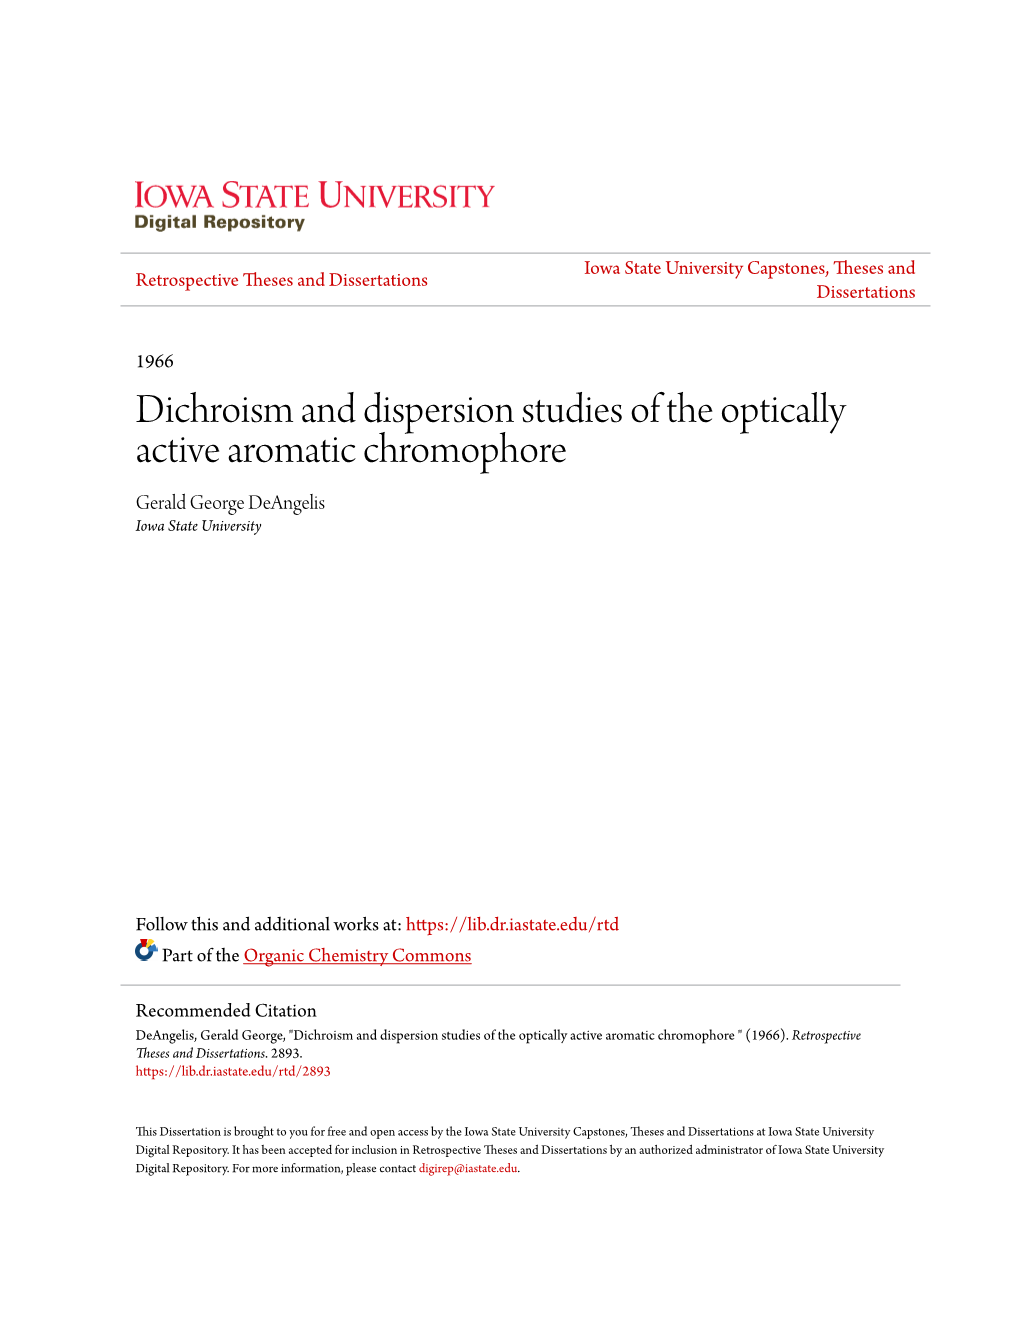 Dichroism and Dispersion Studies of the Optically Active Aromatic Chromophore Gerald George Deangelis Iowa State University